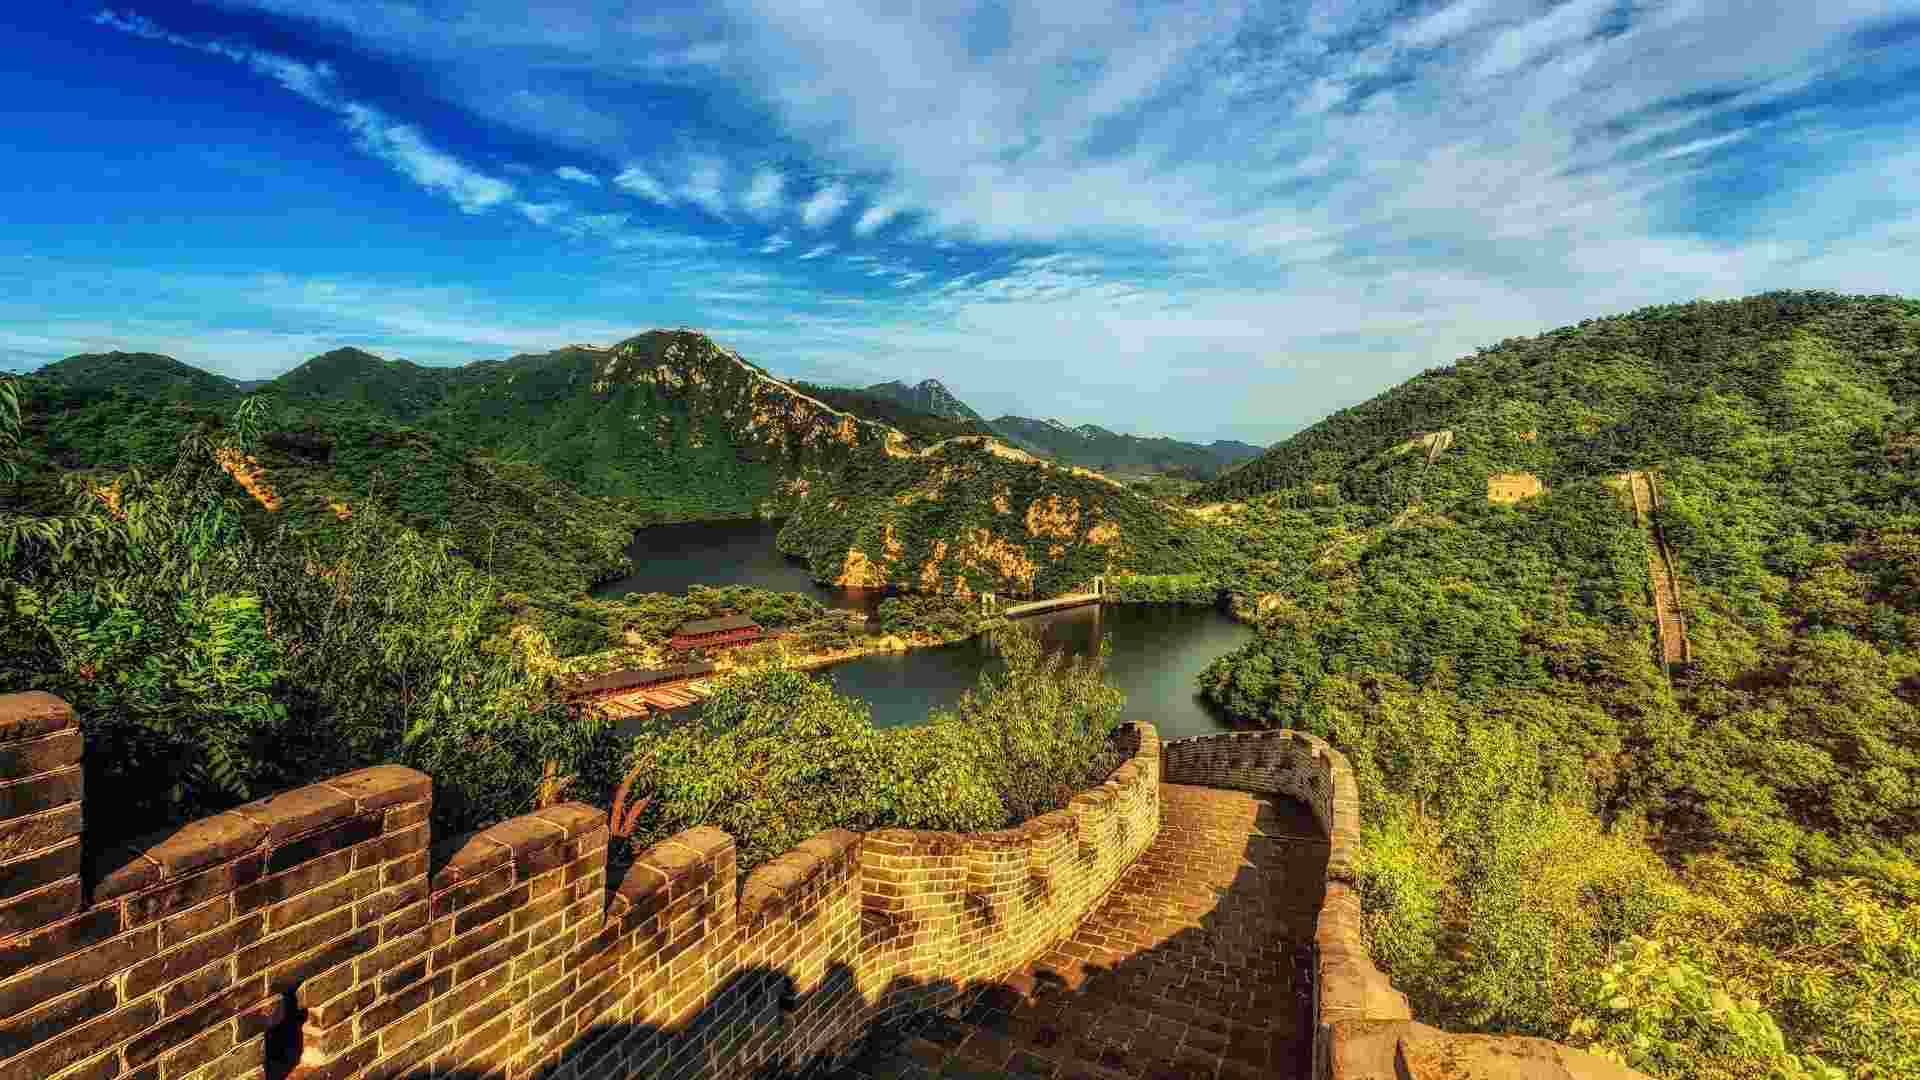 The Western Zhou Dynasty built several walls and beacon towers.